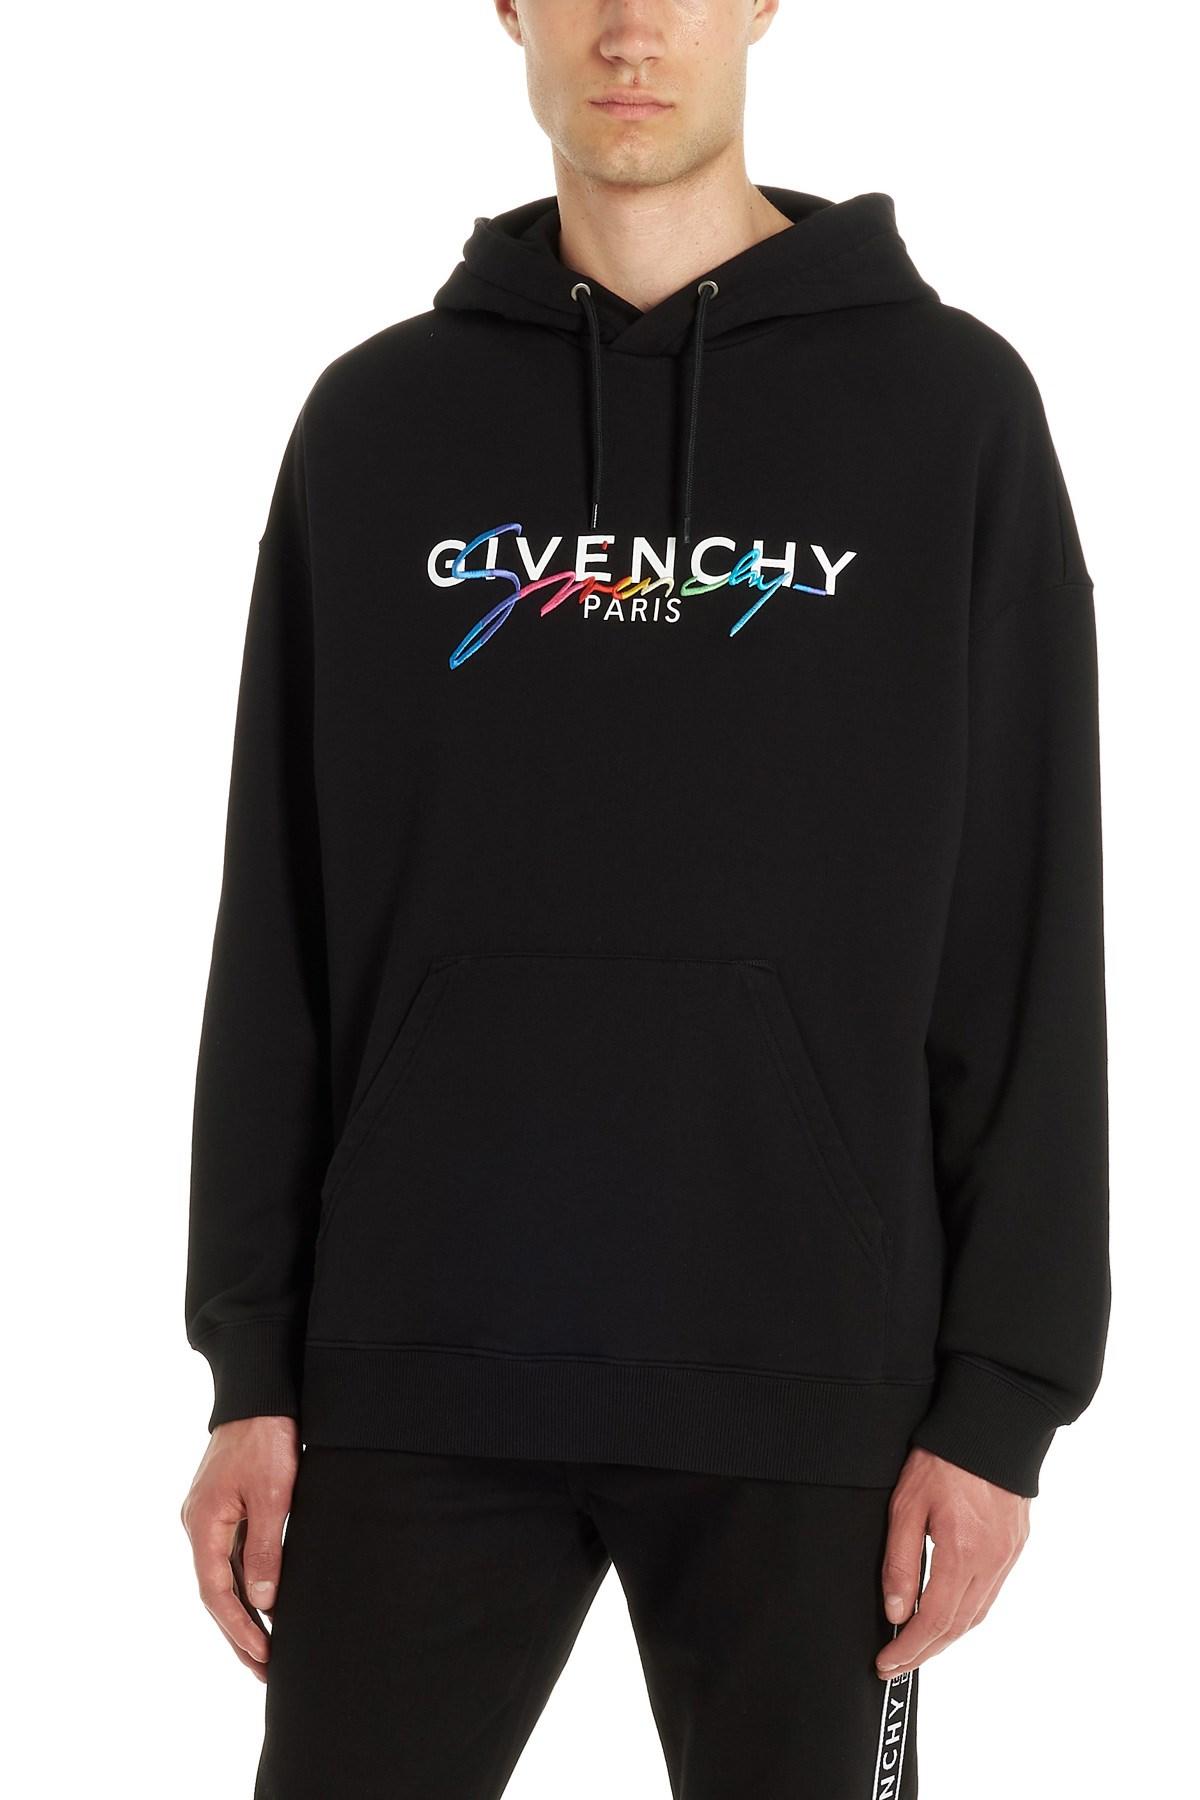 Givenchy Cotton 'capsule Rainbow' Hoodie in Black for Men - Lyst